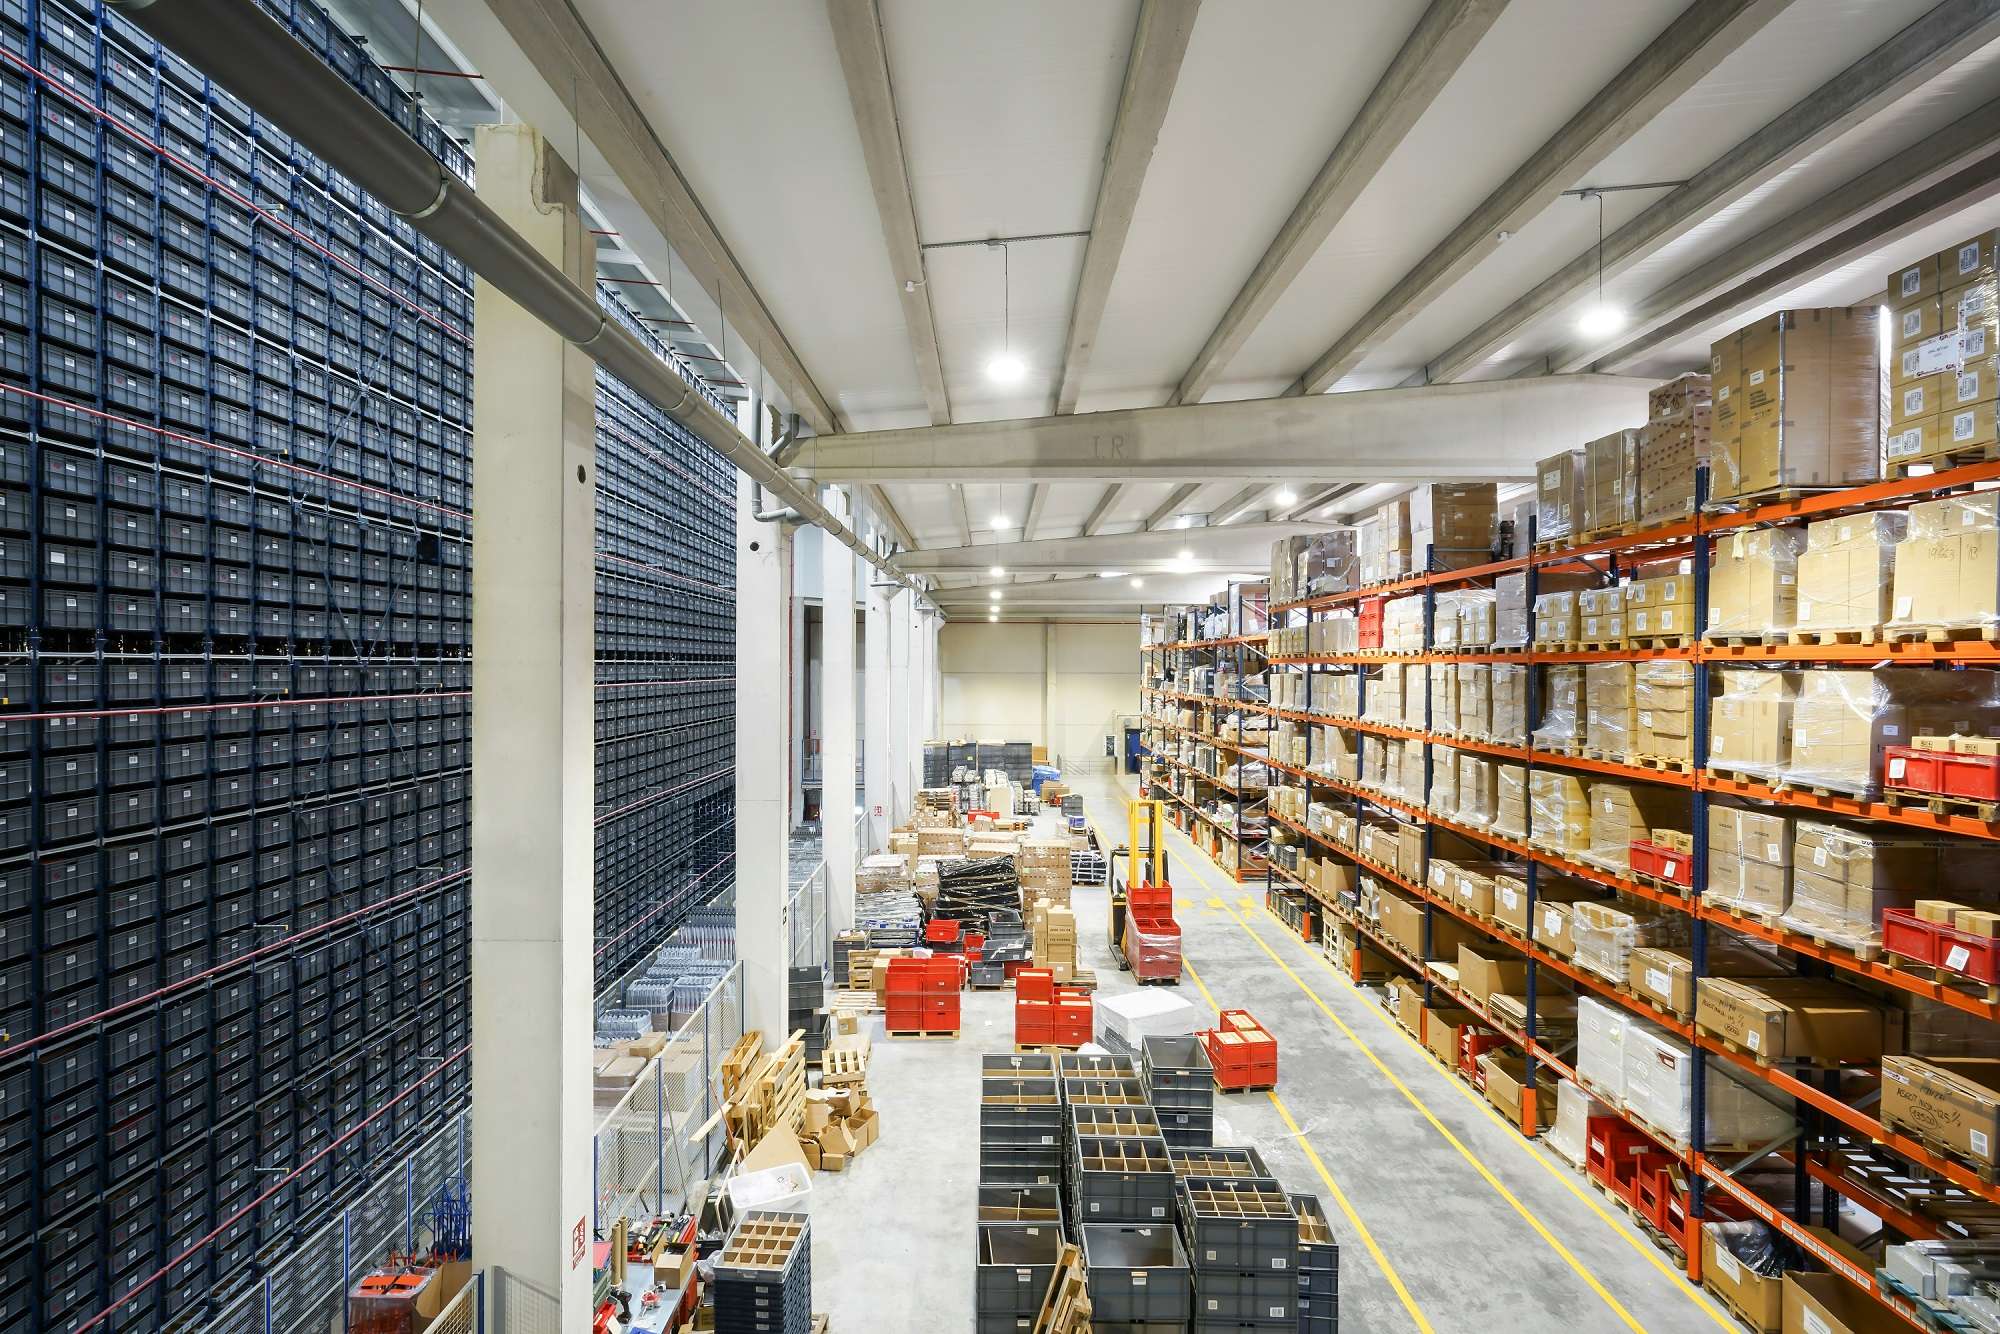 7 Innovative Technologies to Counter Warehouse Challenges